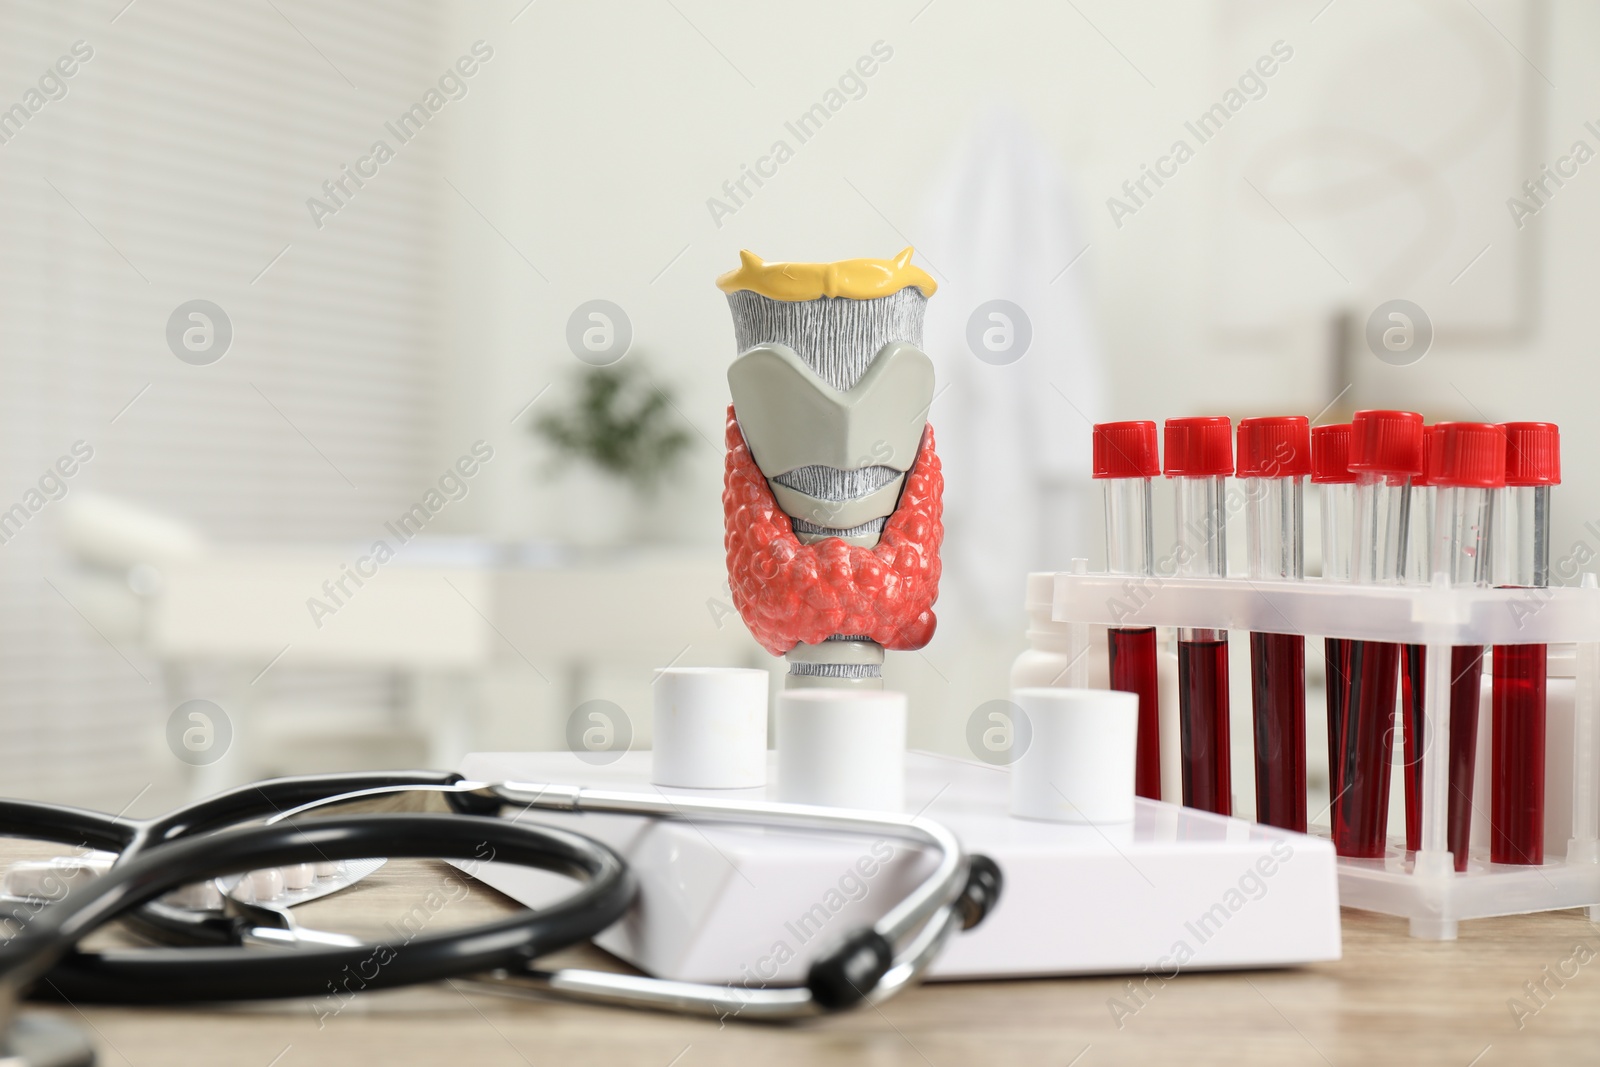 Photo of Endocrinology. Stethoscope, model of thyroid gland and blood samples in test tubes on table indoors